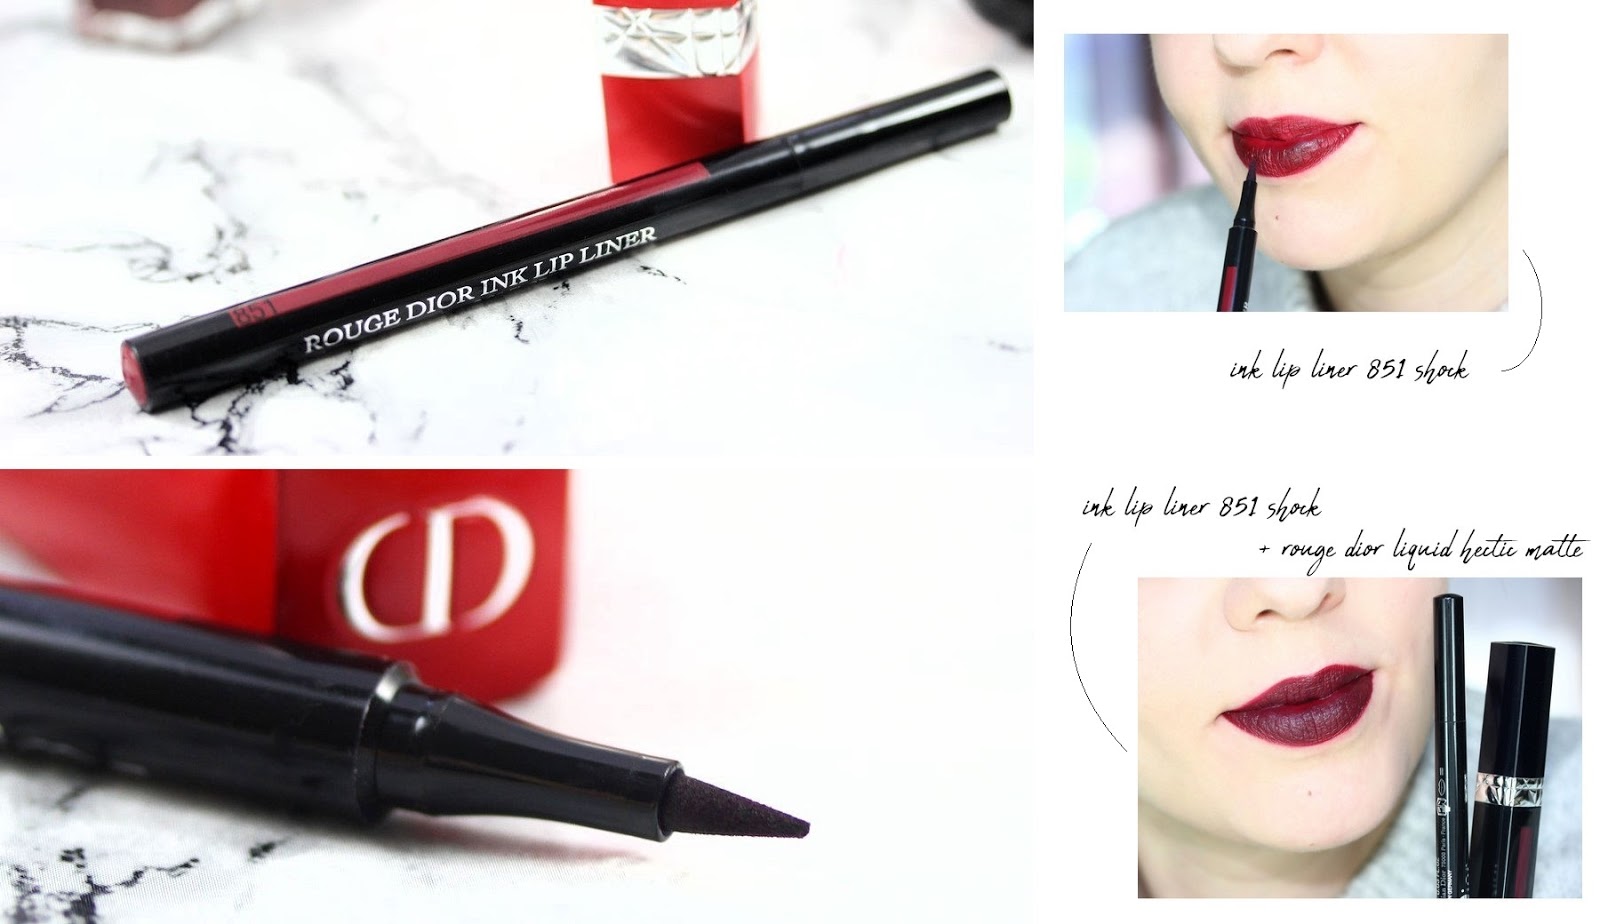 rouge dior ink lip liner swatches